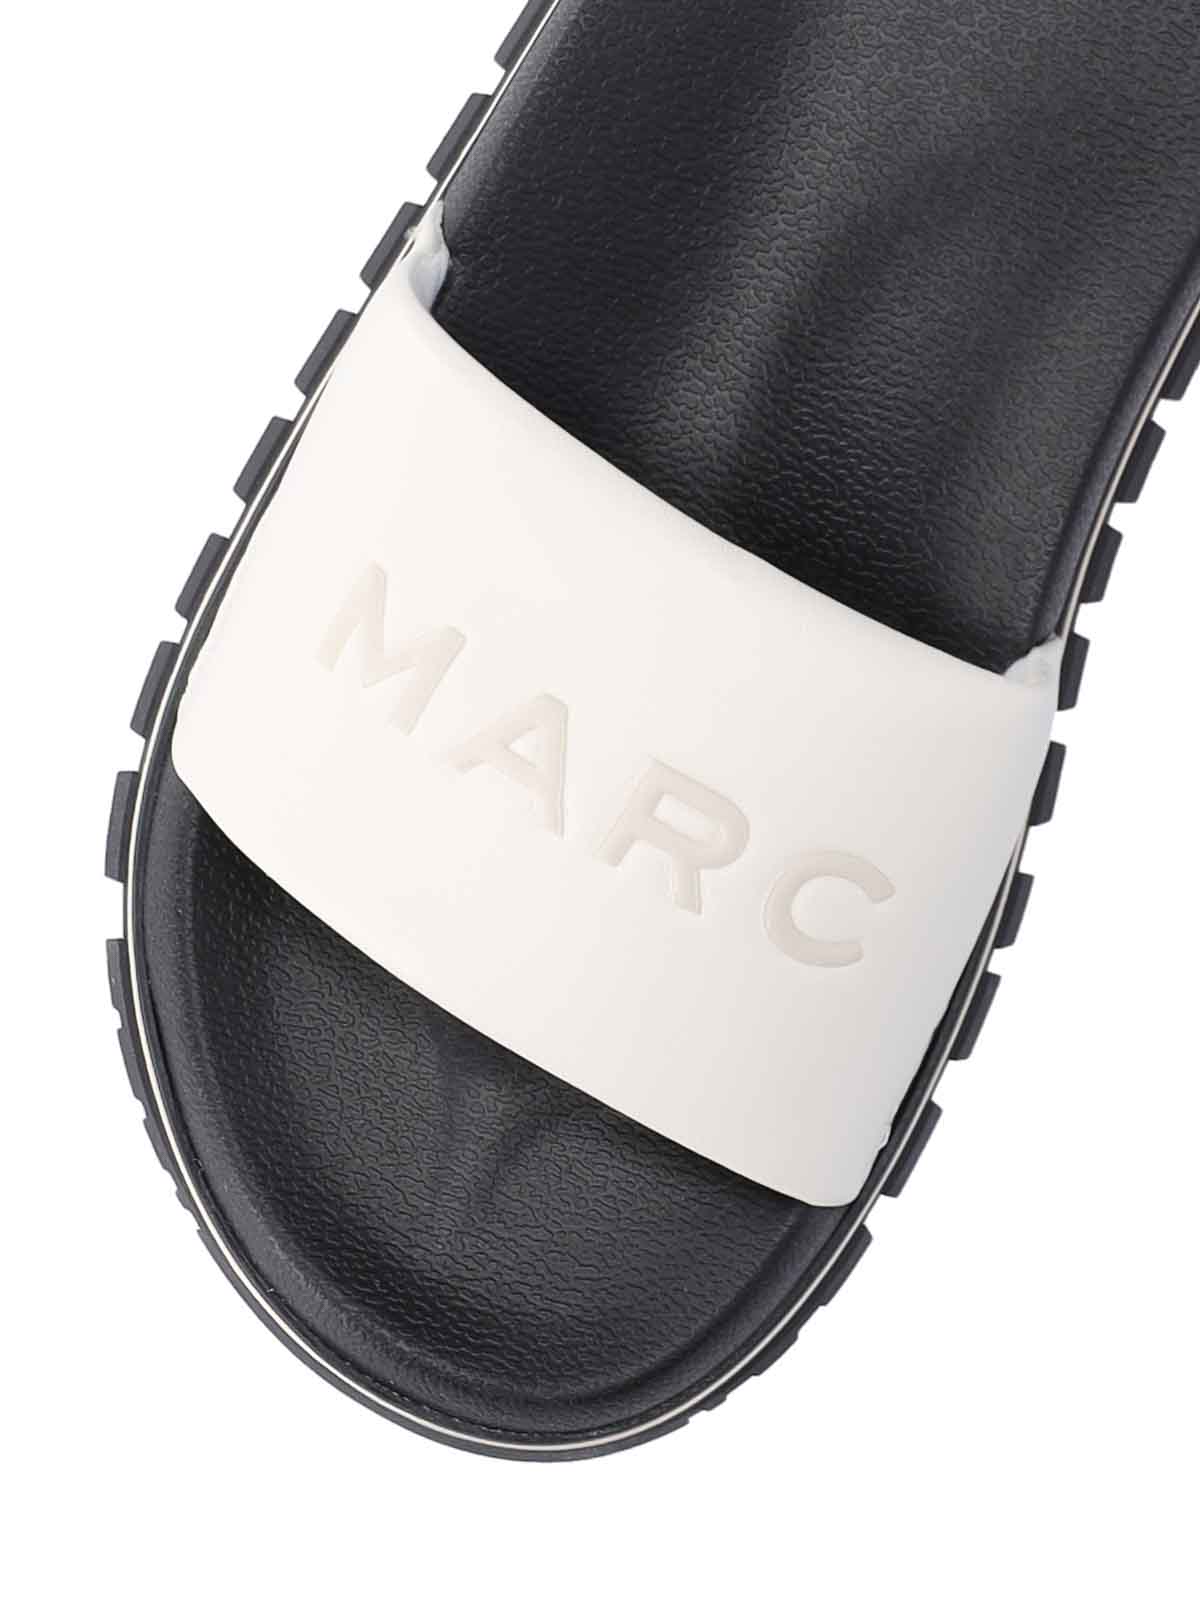 Shop Marc Jacobs Sandalias - The Leather In White